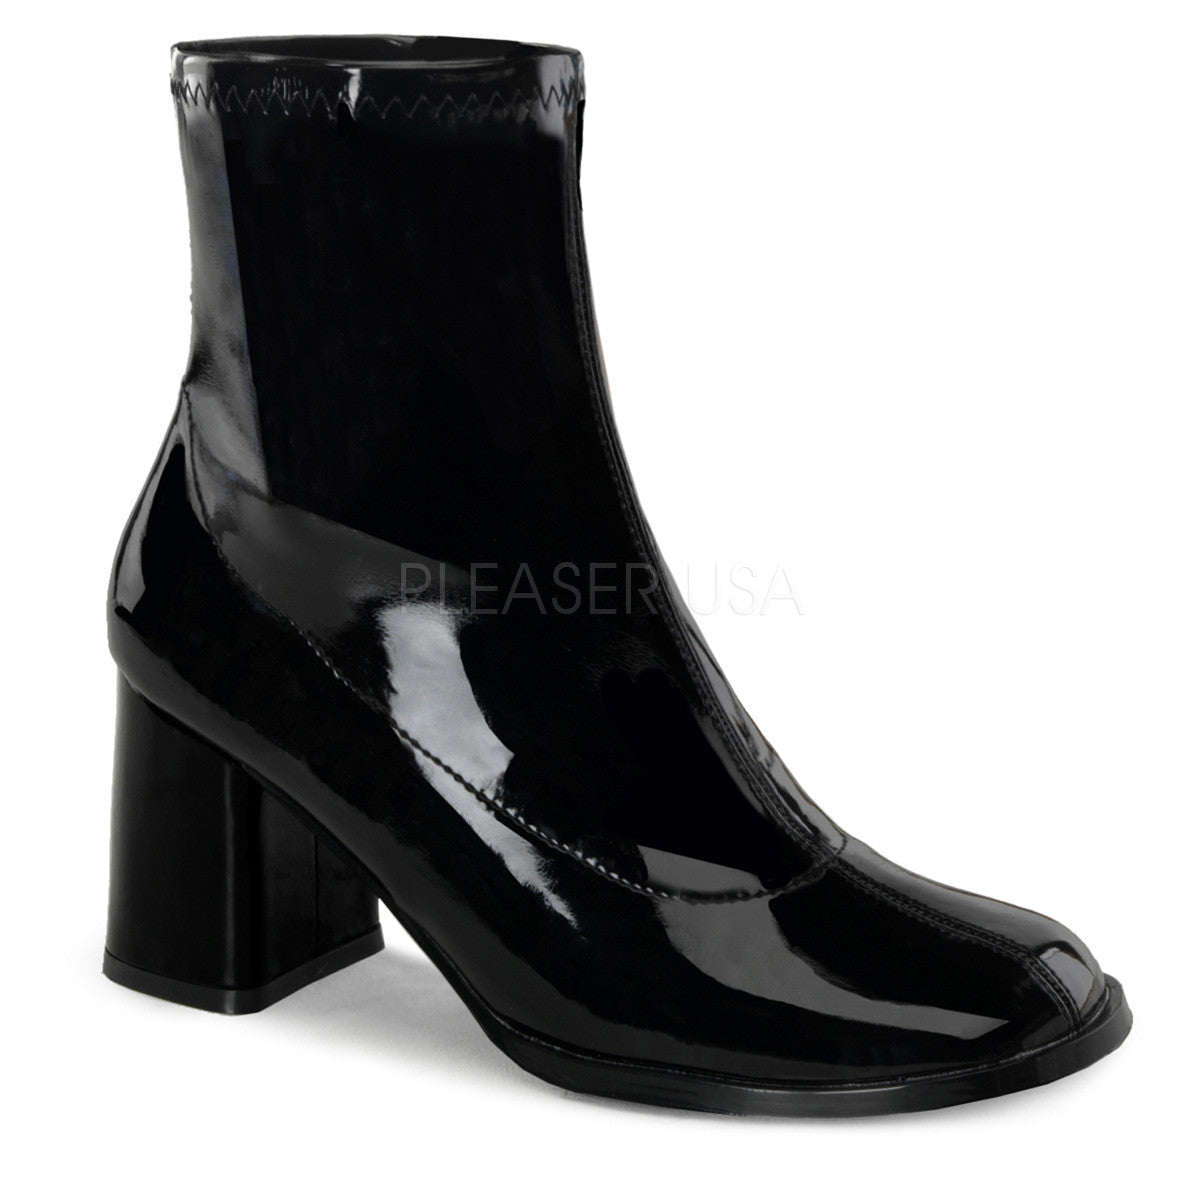 pleaser gogo boots